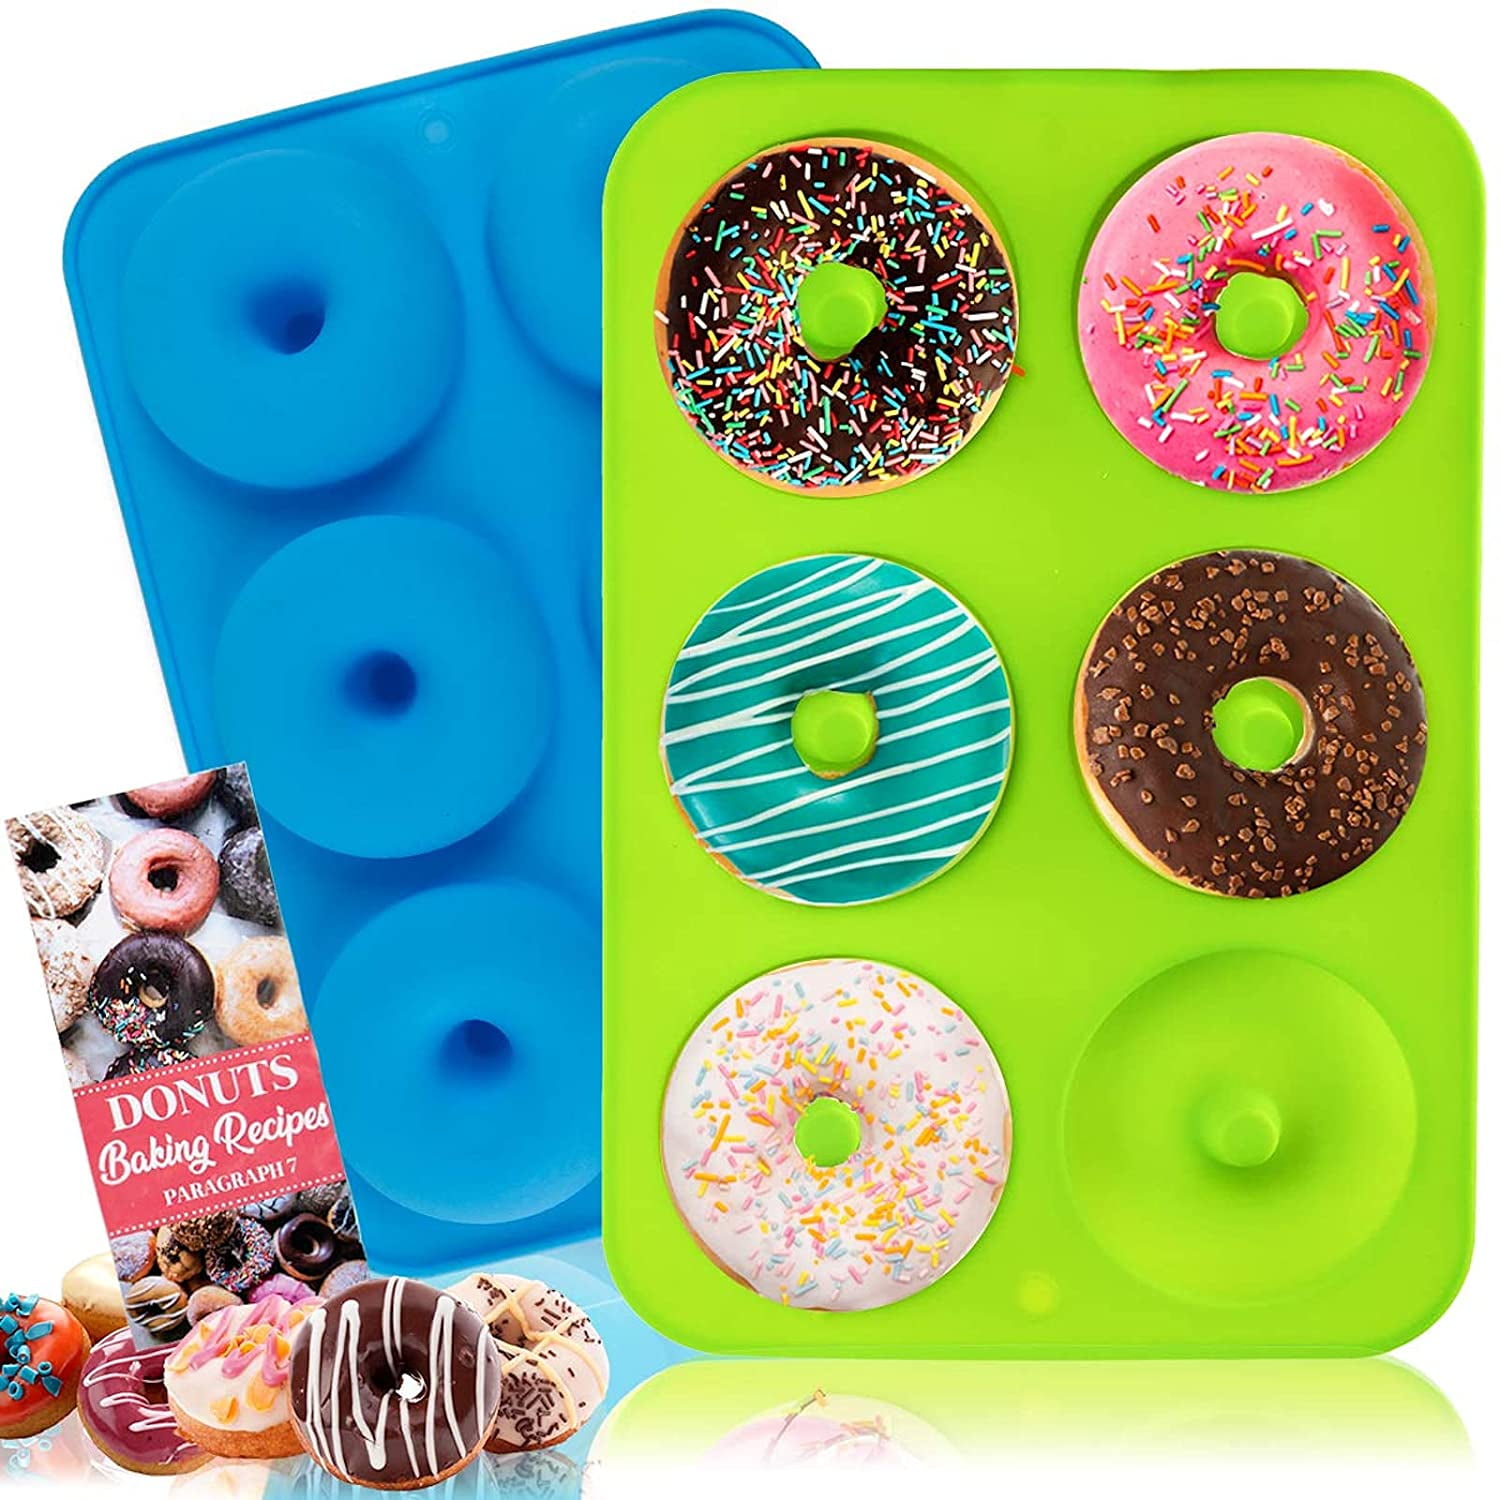 Silicone Donut Pan 2pcs Non-Stick Mold Silicone Donut Mold for 6 